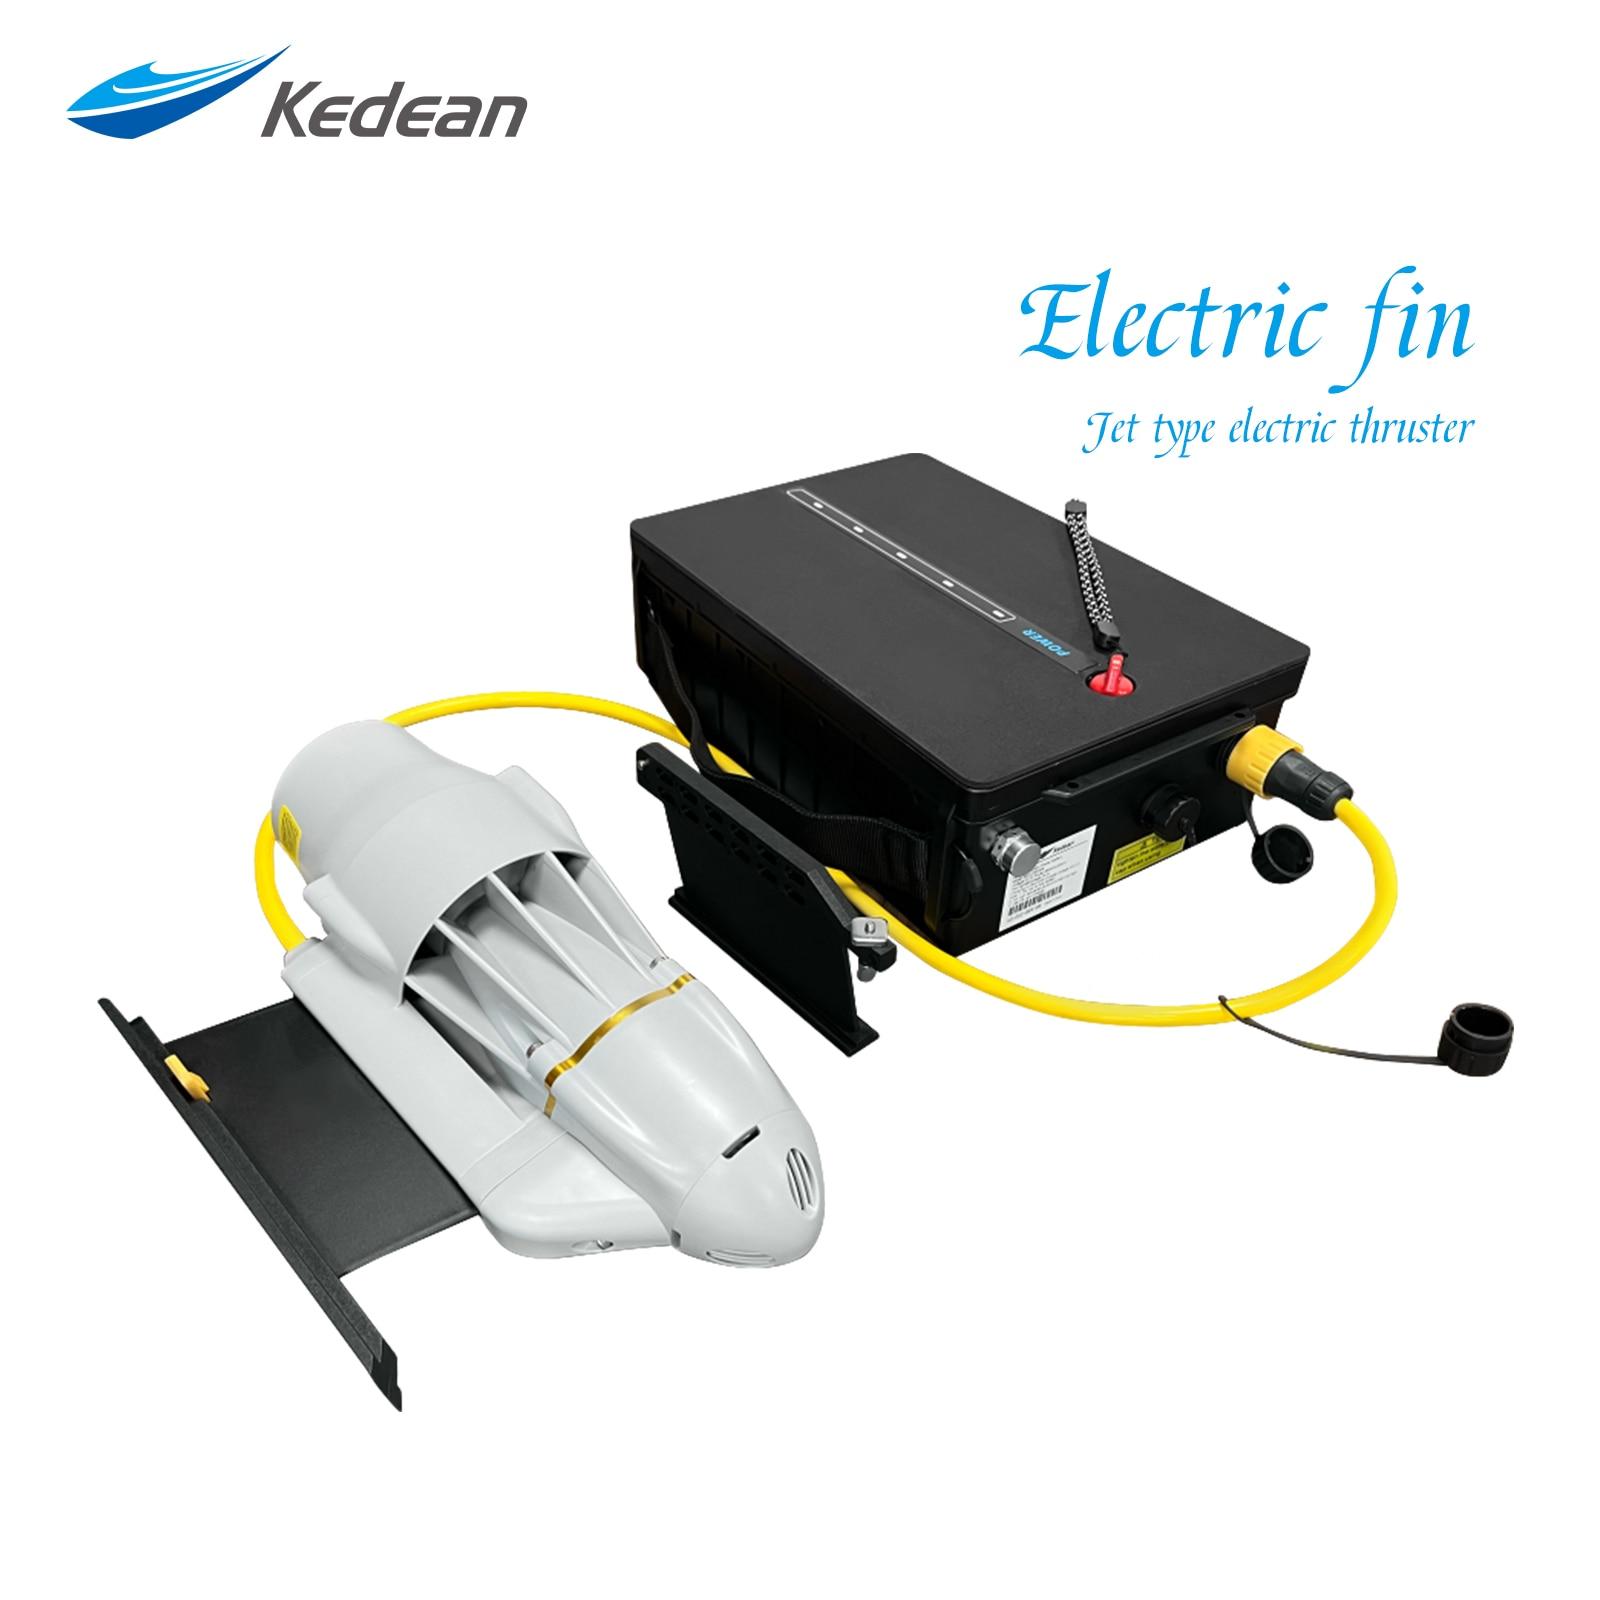 SUP-Surf-Kayak-Electric-Fin-Electric-Motor-With-Battery-Case-electric-motor-sup-Stand-Up-Paddle.jpg